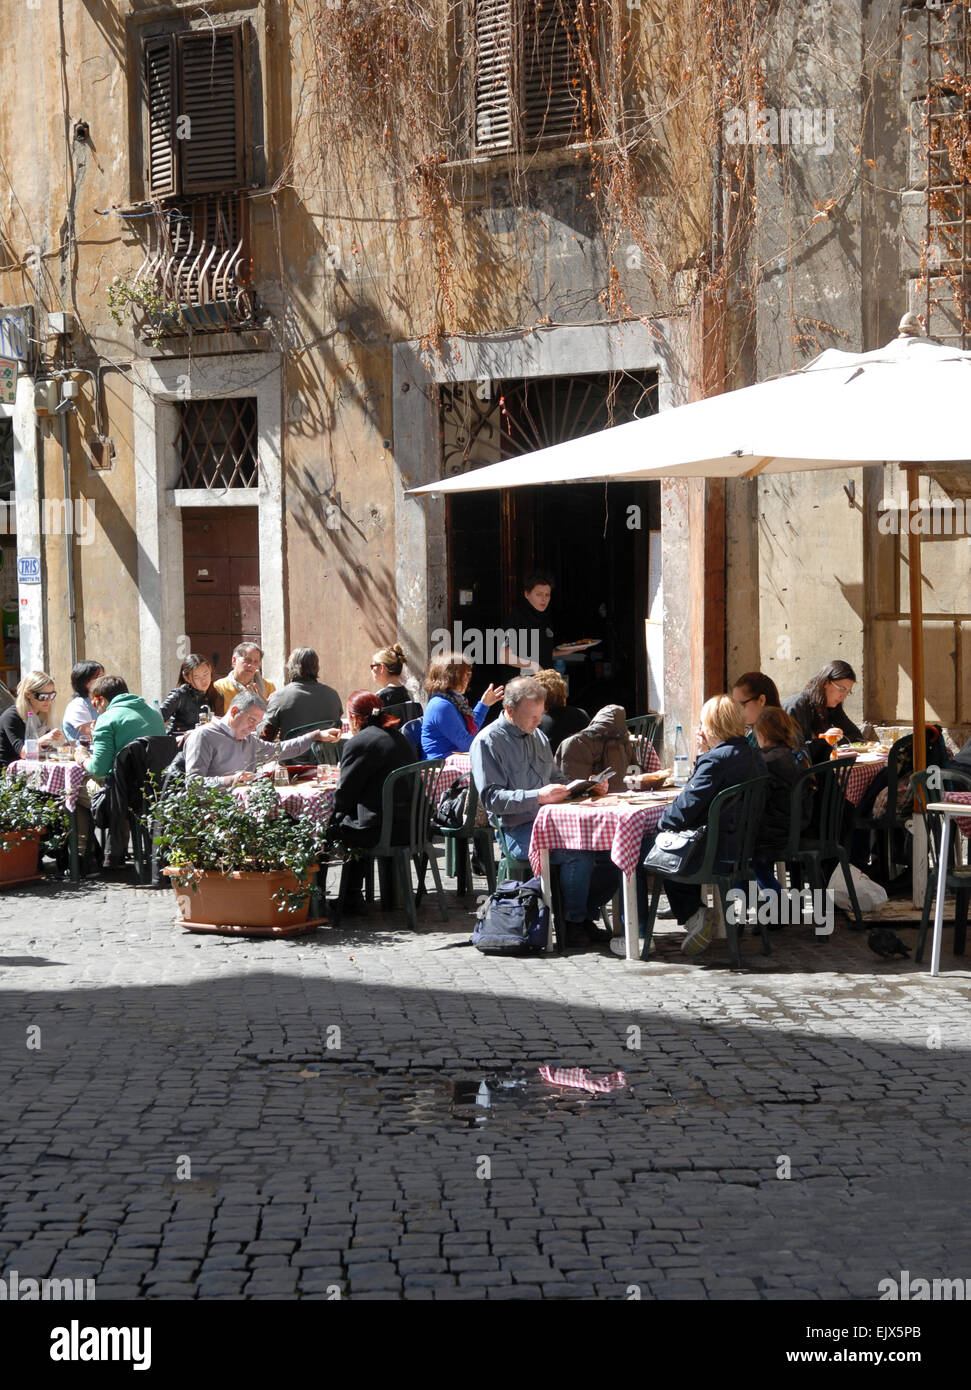 Eating out in a pedestrianized side street just off the Piazza Navona, Rome. Stock Photo